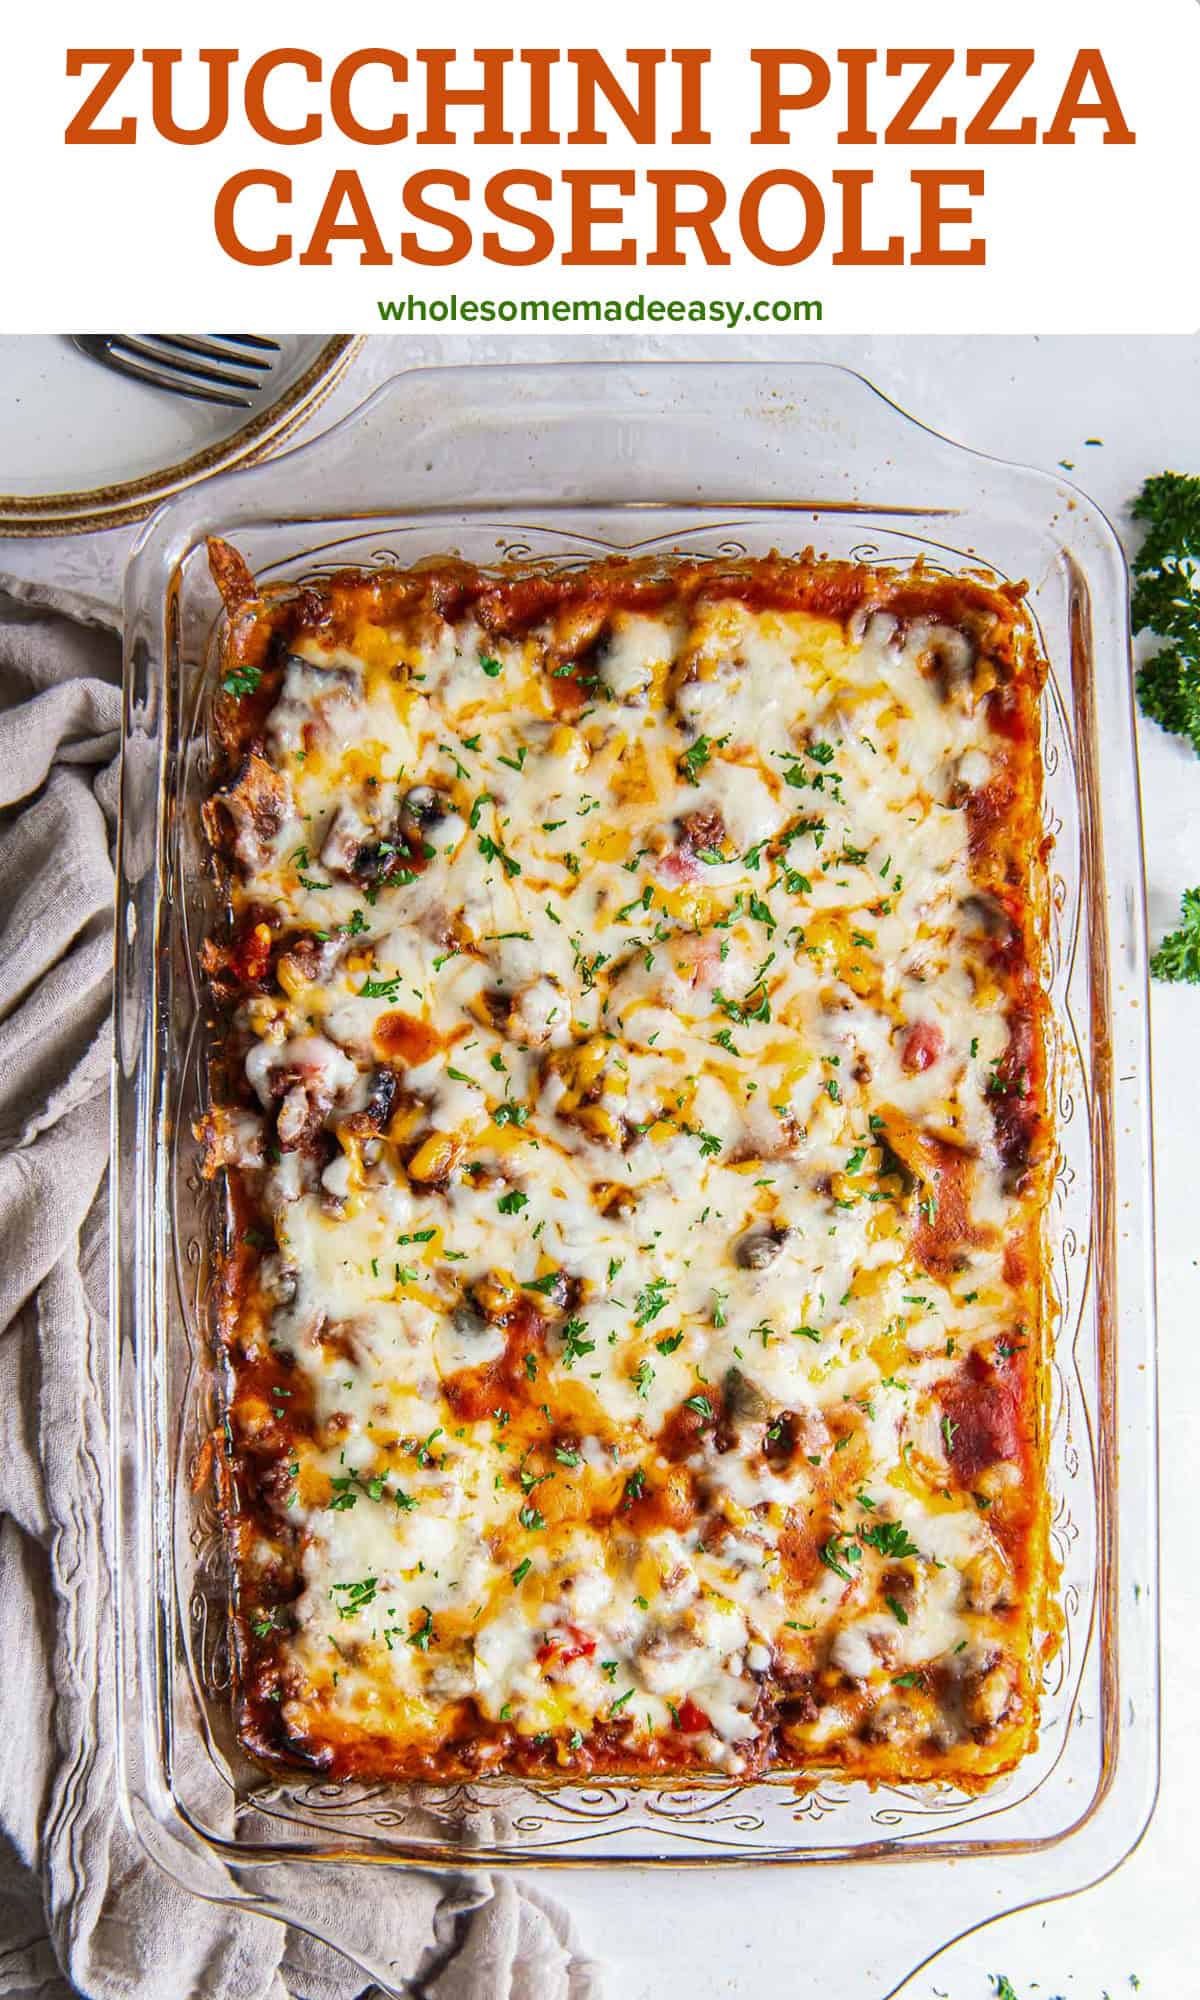 Cheesy zucchini pizza casserole in a baking dish with text.